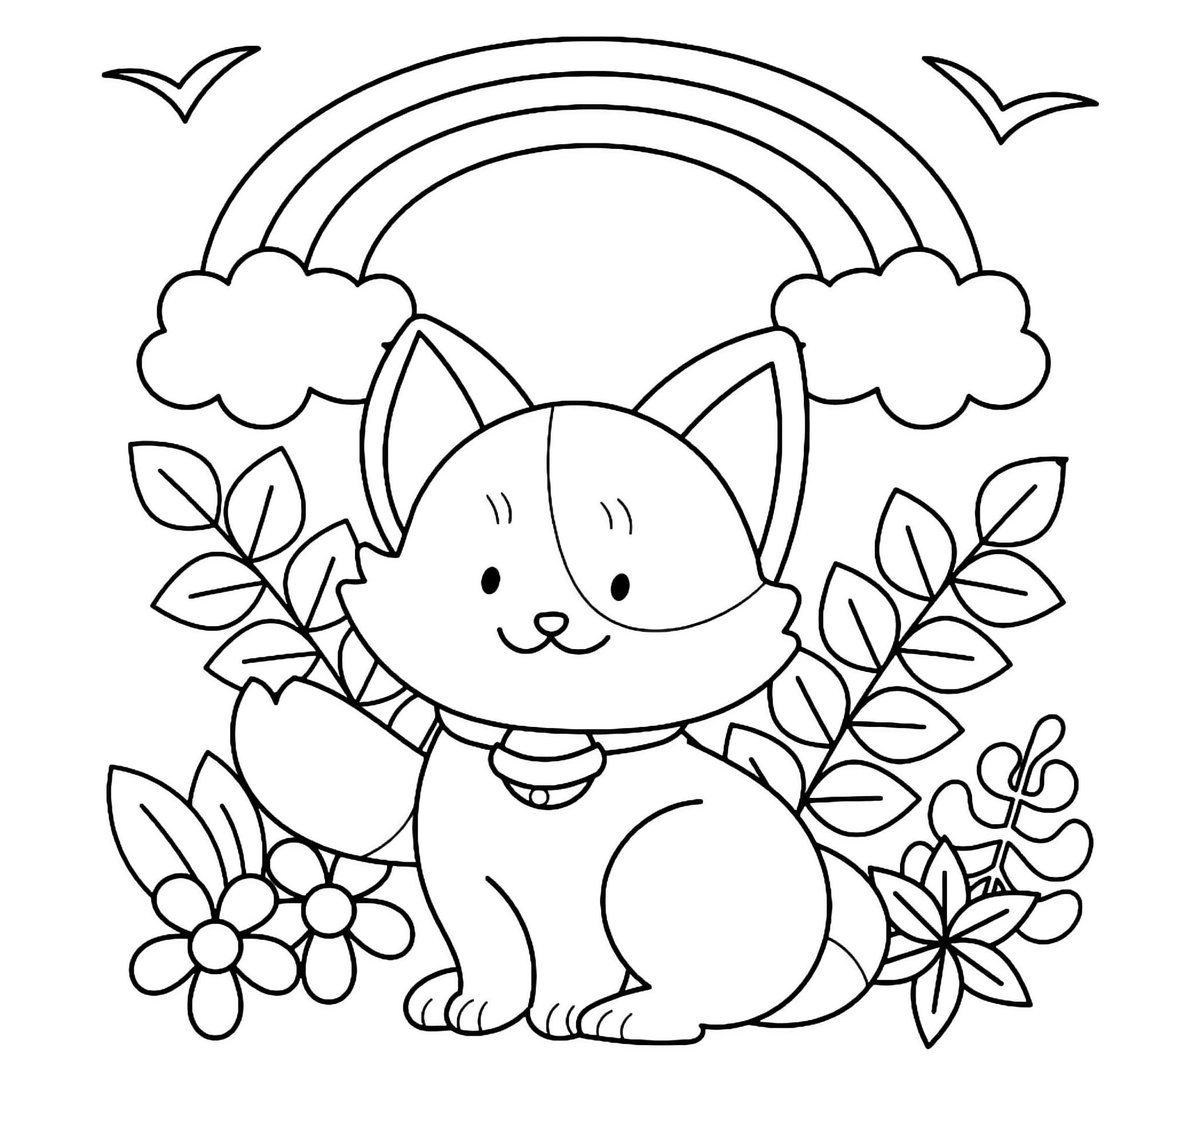 I Will Do Coloring Page For Kids and Adults
#artist
#colors
#coloringbookforadults
#artwork
#coloringtherapy
#painting
#coloringaddict
#illustration
#coloringbooks
#sketch
#arttherapy
#colorful
#draw
#digitalart
#coloringpages
#coloringpage